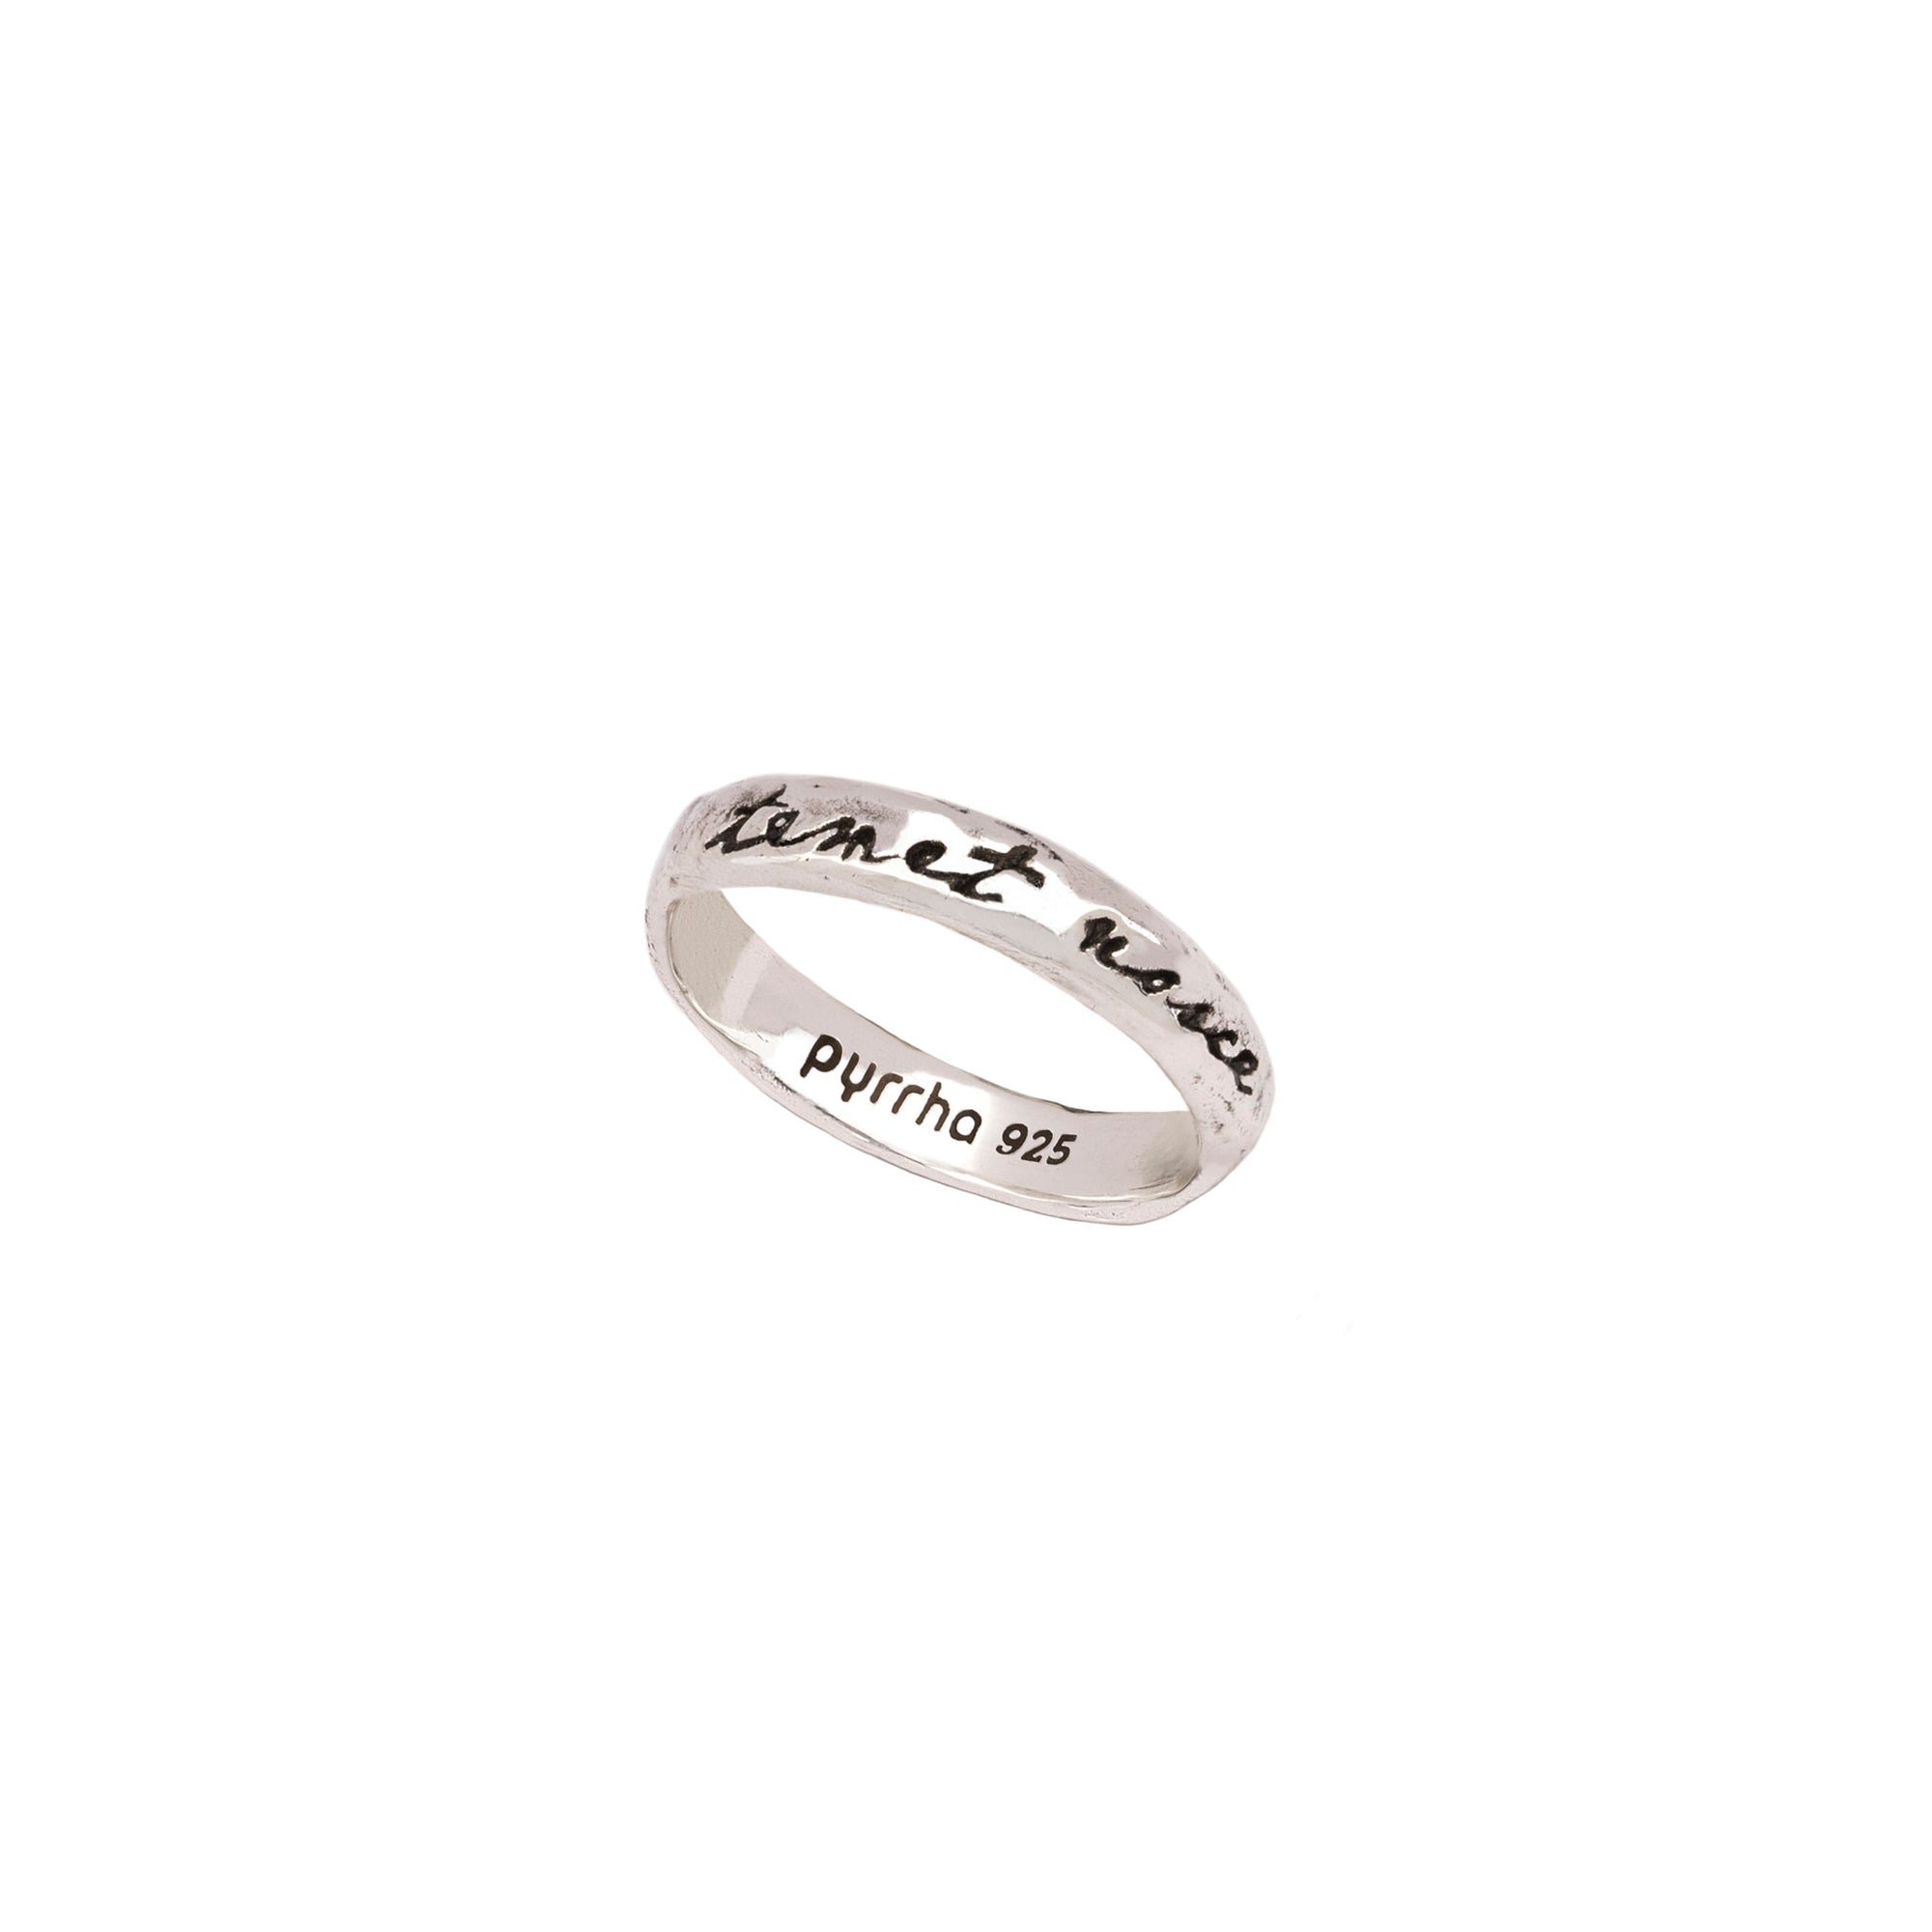 An engraved silver band ring representing those who know themselves